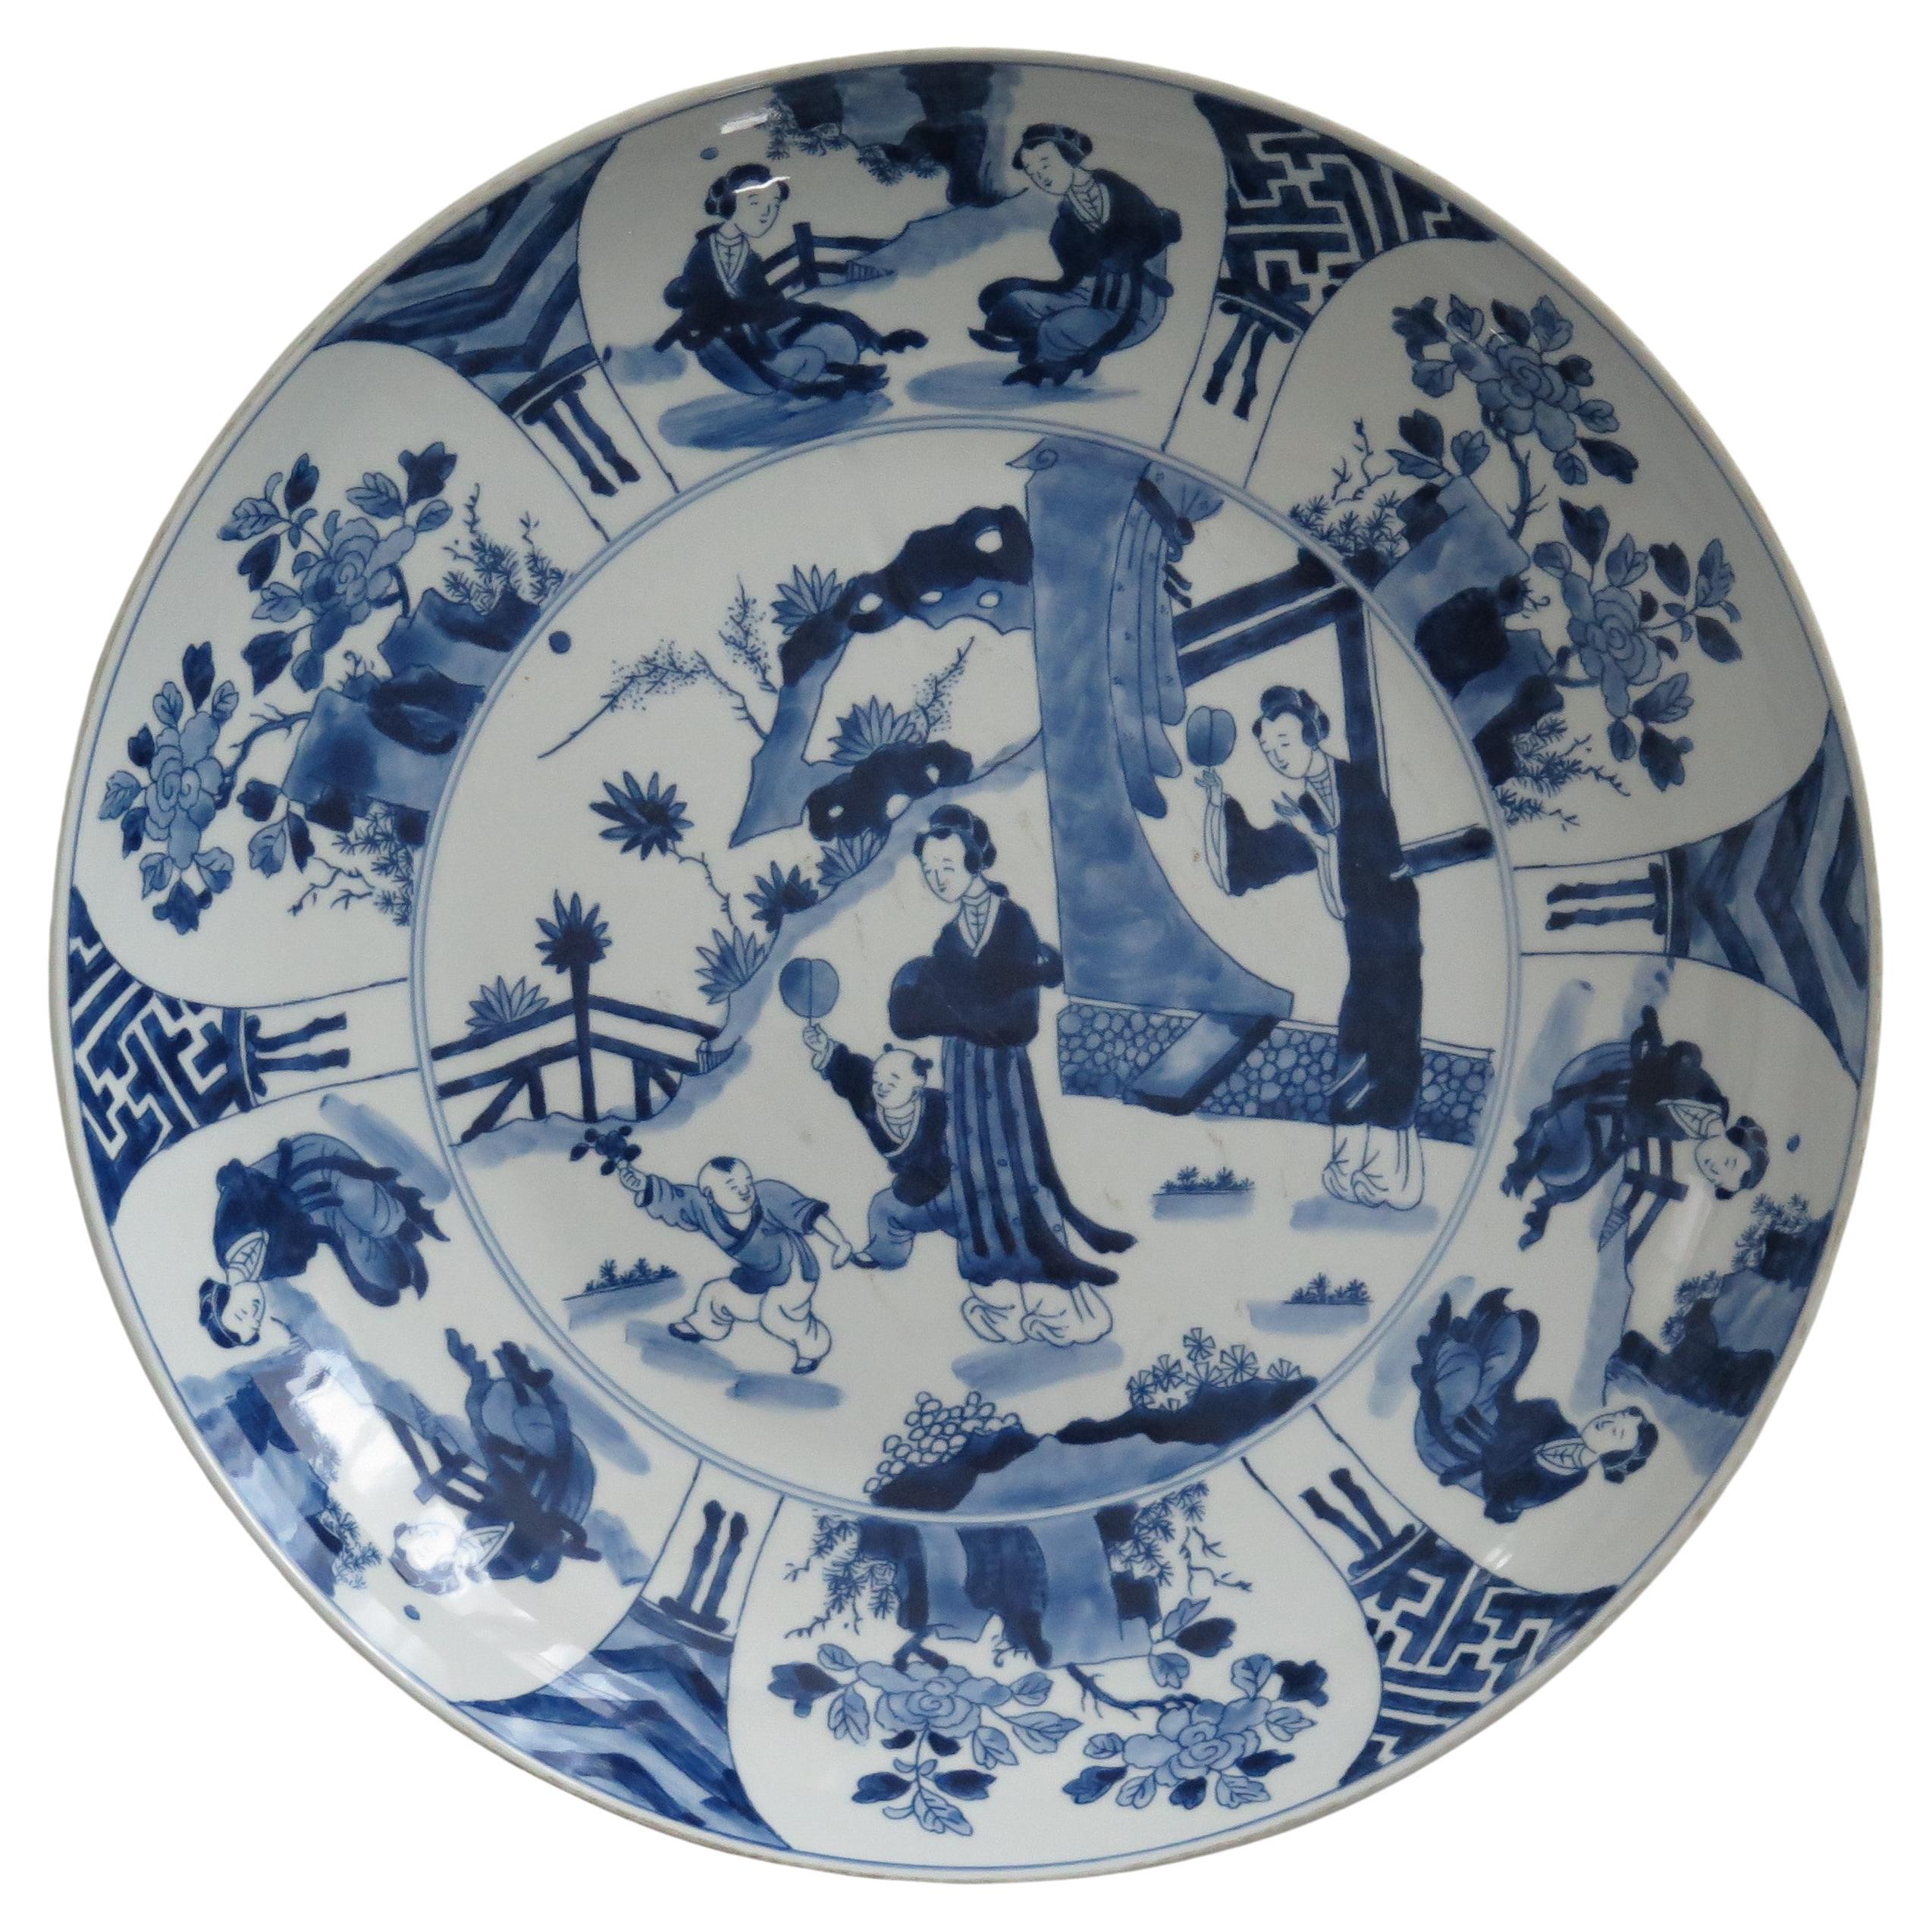 Large Chinese Export Dish or Plate Porcelain Blue & White, Circa 1920s